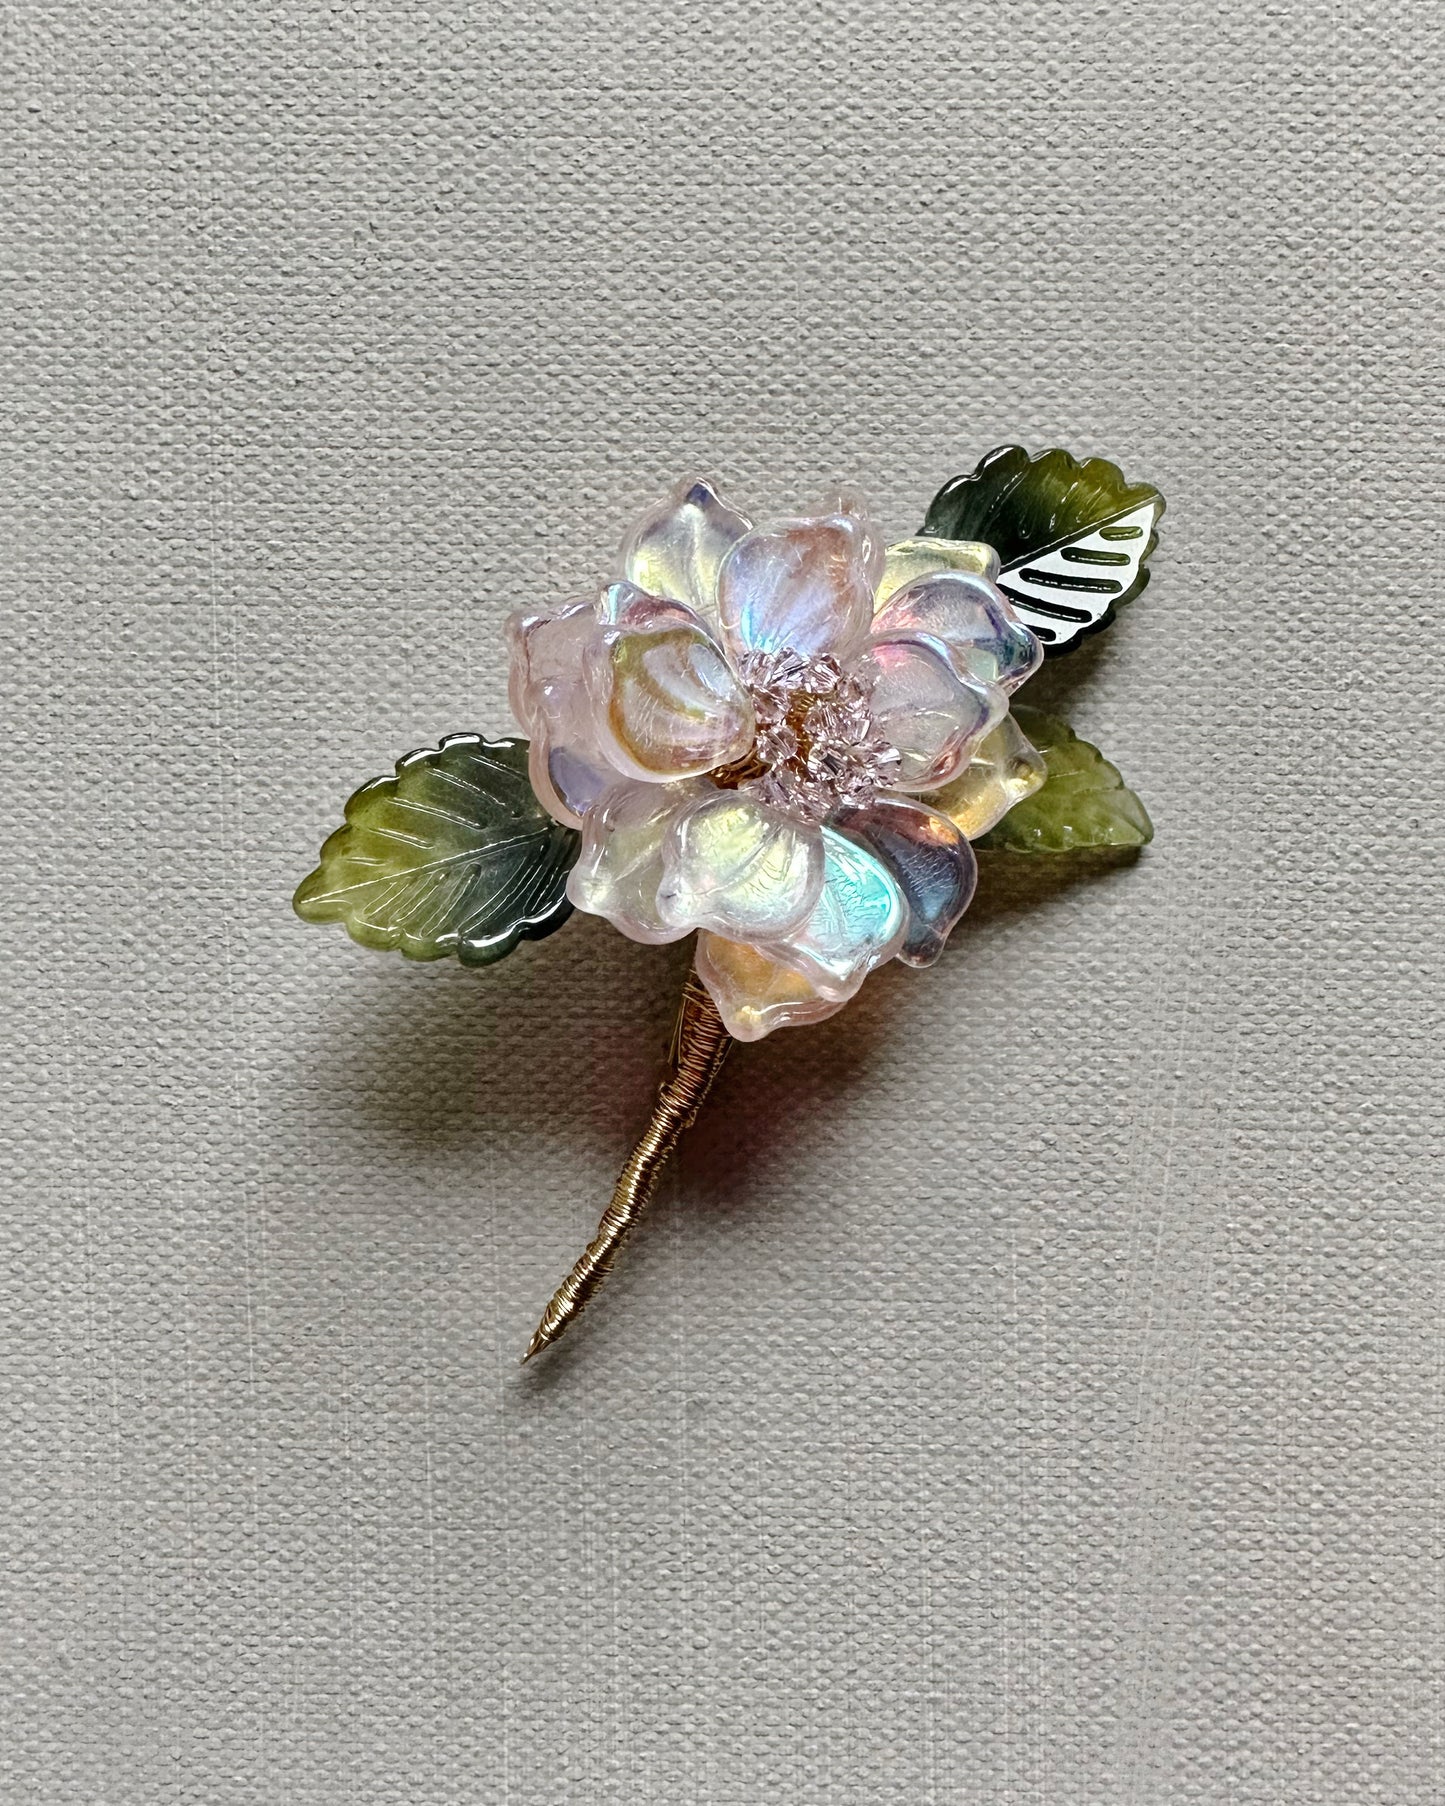 The new peony lapel brooch in AB pink